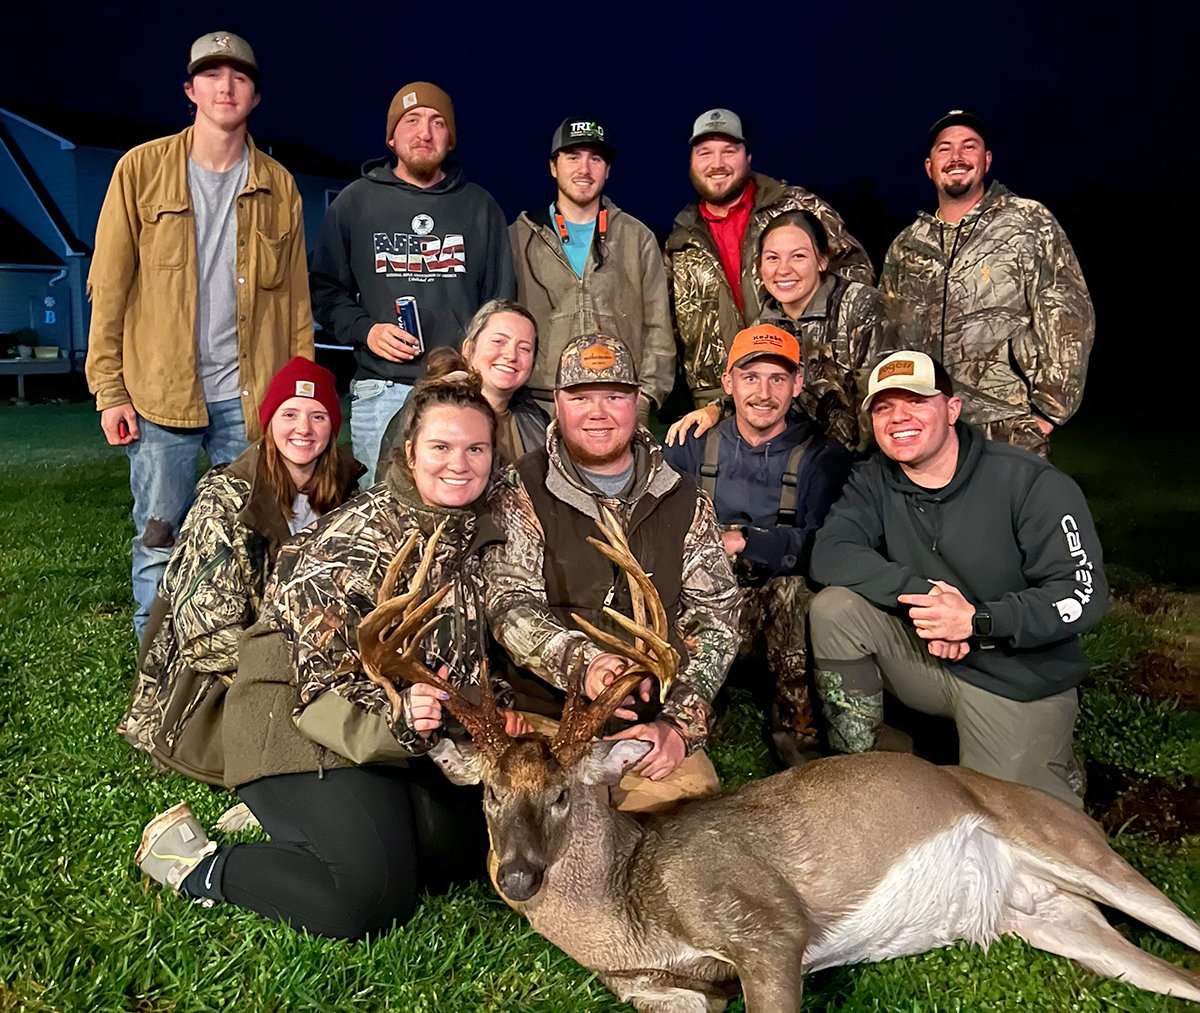 It was quite the party after Allred bagged his buck. Image courtesy of Preston Allred